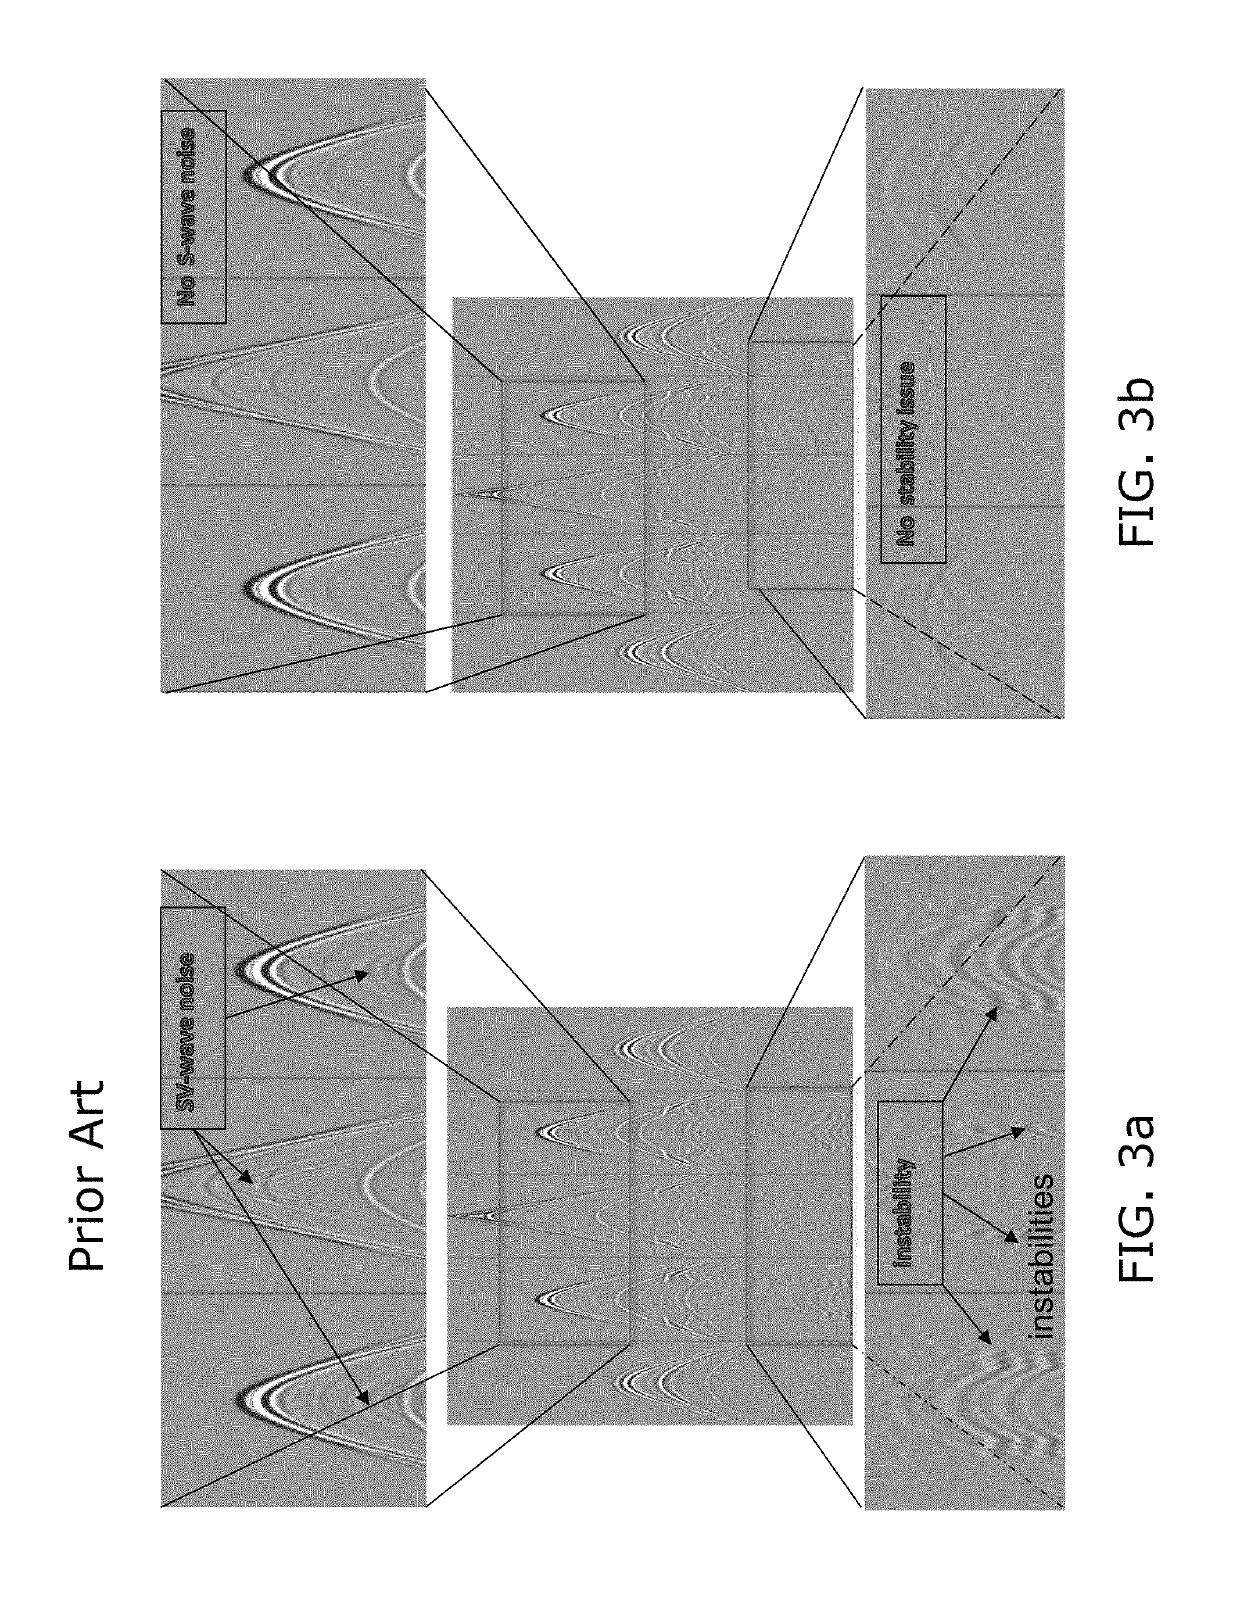 Method of operating a data-processing system for the simulation of the acoustic wave propagation in the transversely isotropic media comprising an hydrocarbon reservoir